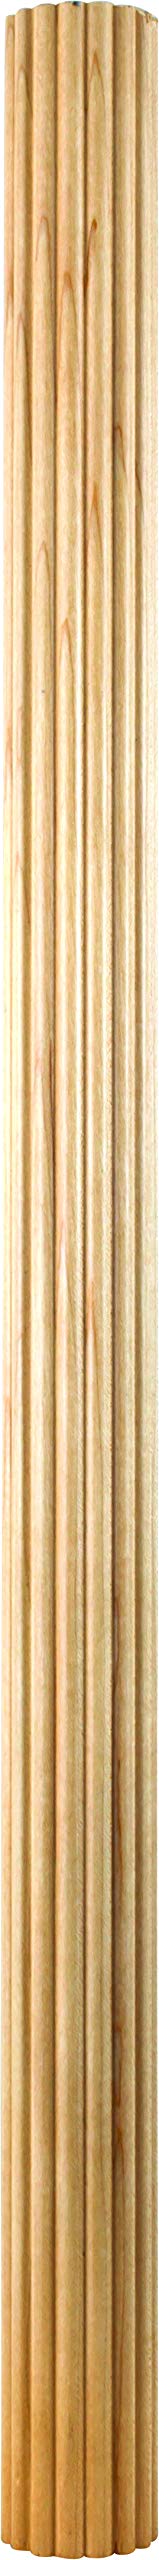 Hardware Resources COV-5-CH 3/4" D x 5" H Cherry Cove Crown Moulding